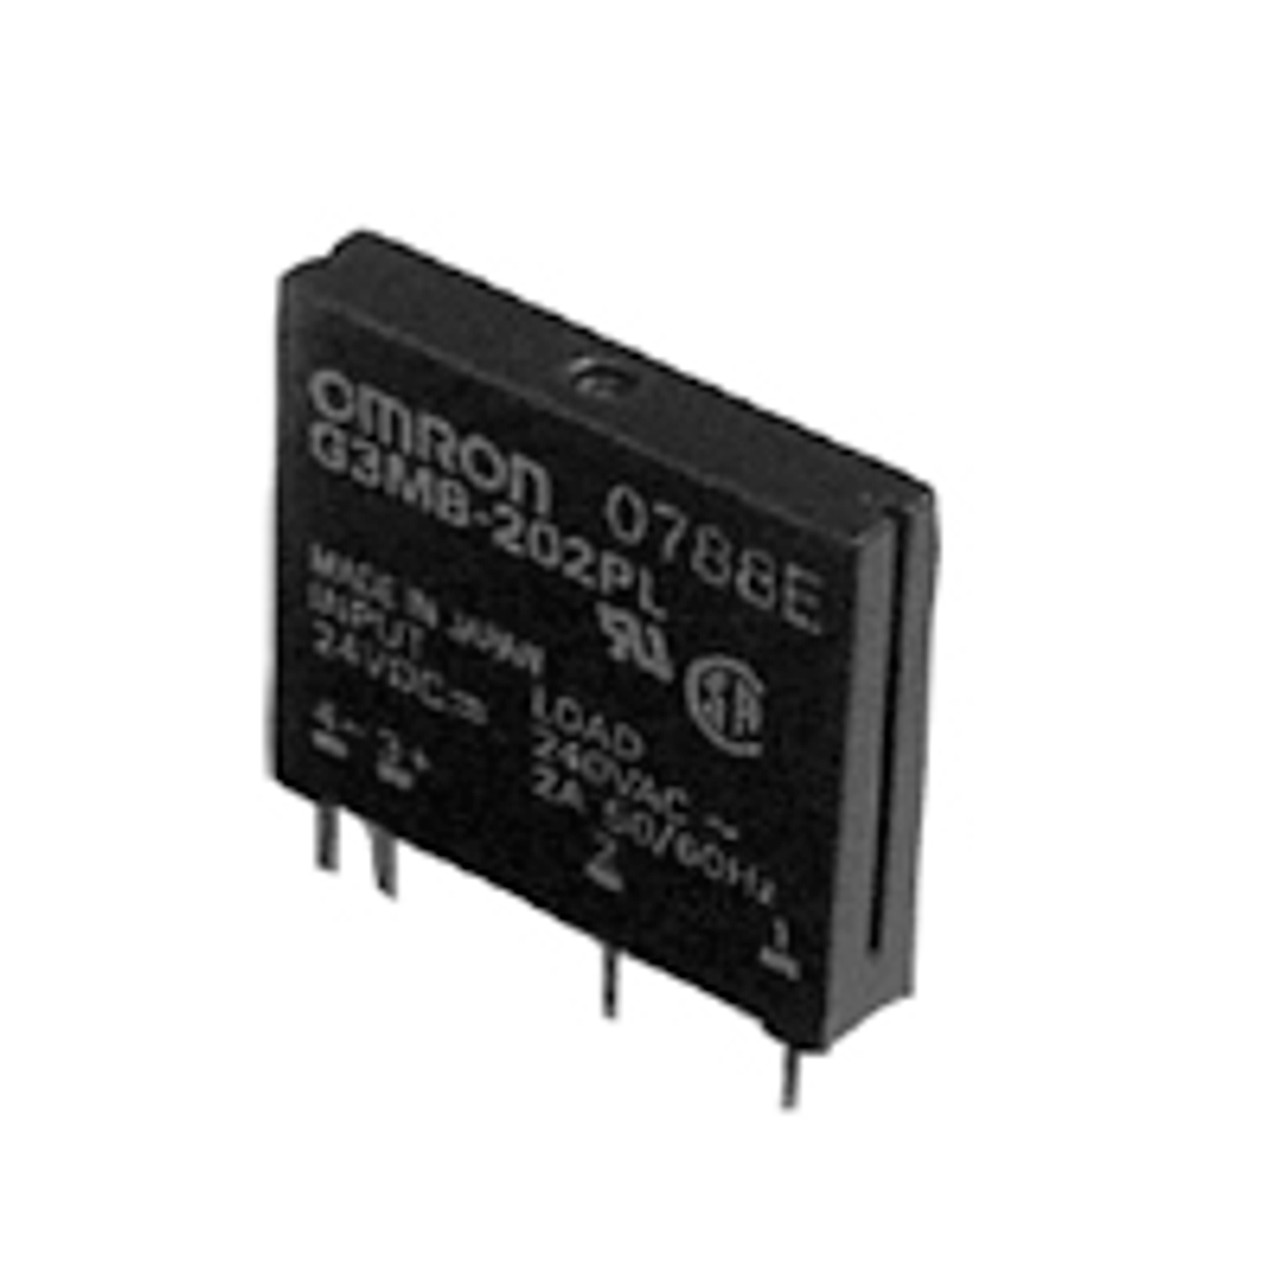 Omron G3MB-202P-DC12 Solid State Relays